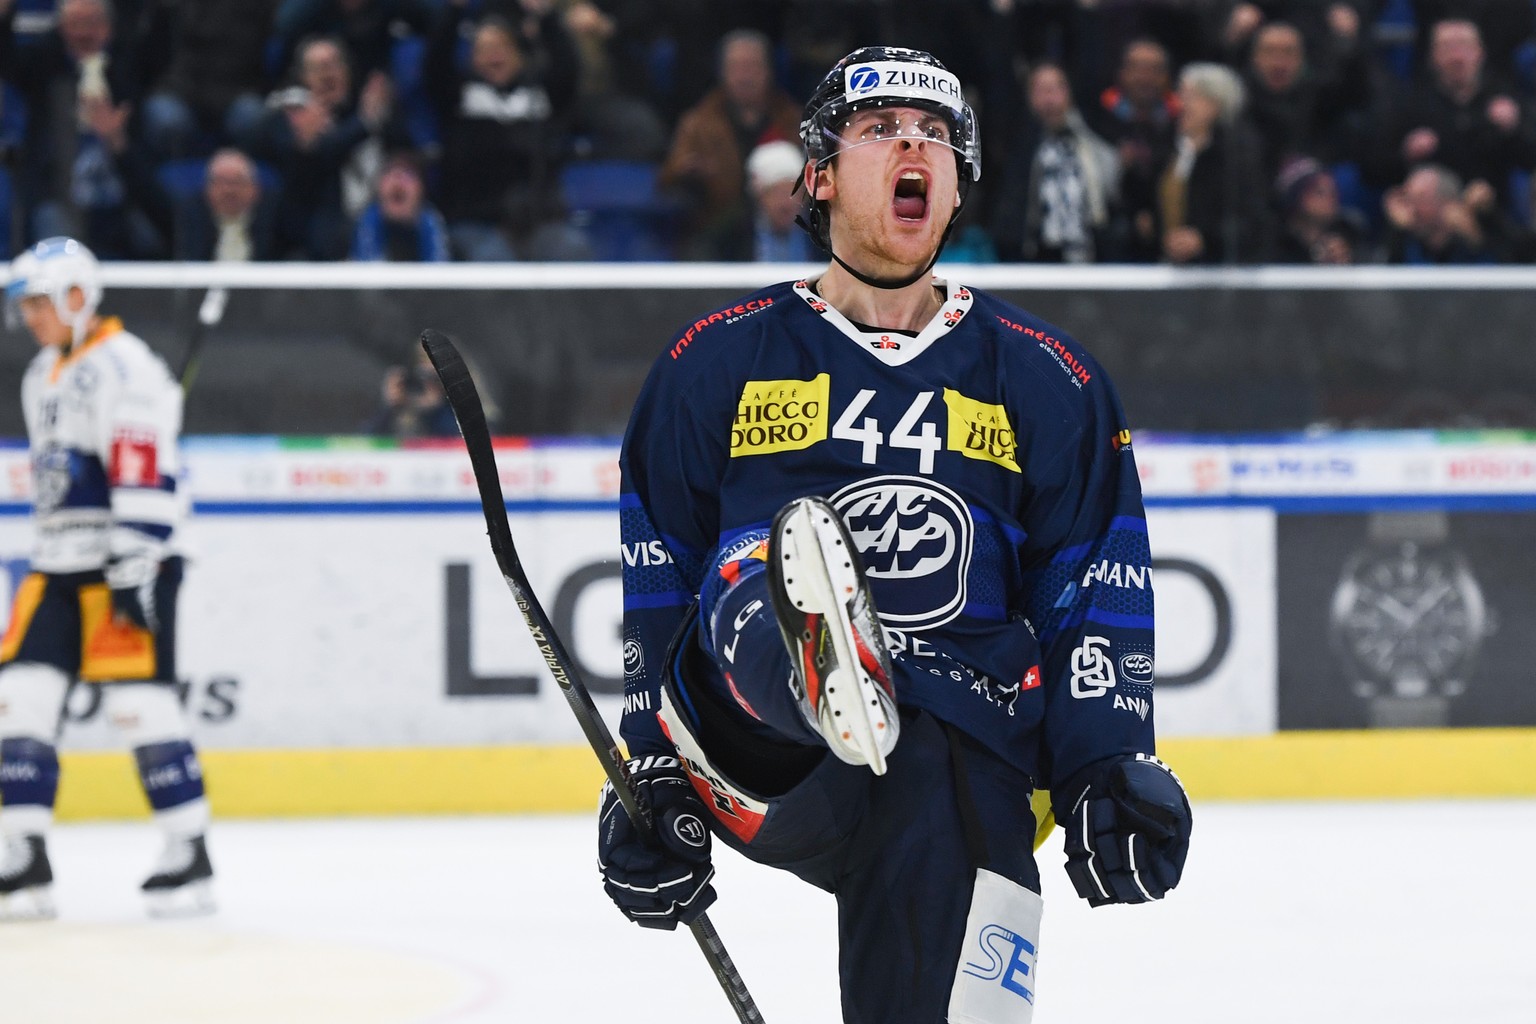 Ambri&#039;s player Andre Heim celebrates the 4-4 goal, during the match of National League Swiss Championship 2022/23 between HC Ambri Piotta and EV Zug at the ice stadium Gottardo Arena, Switzerland ...